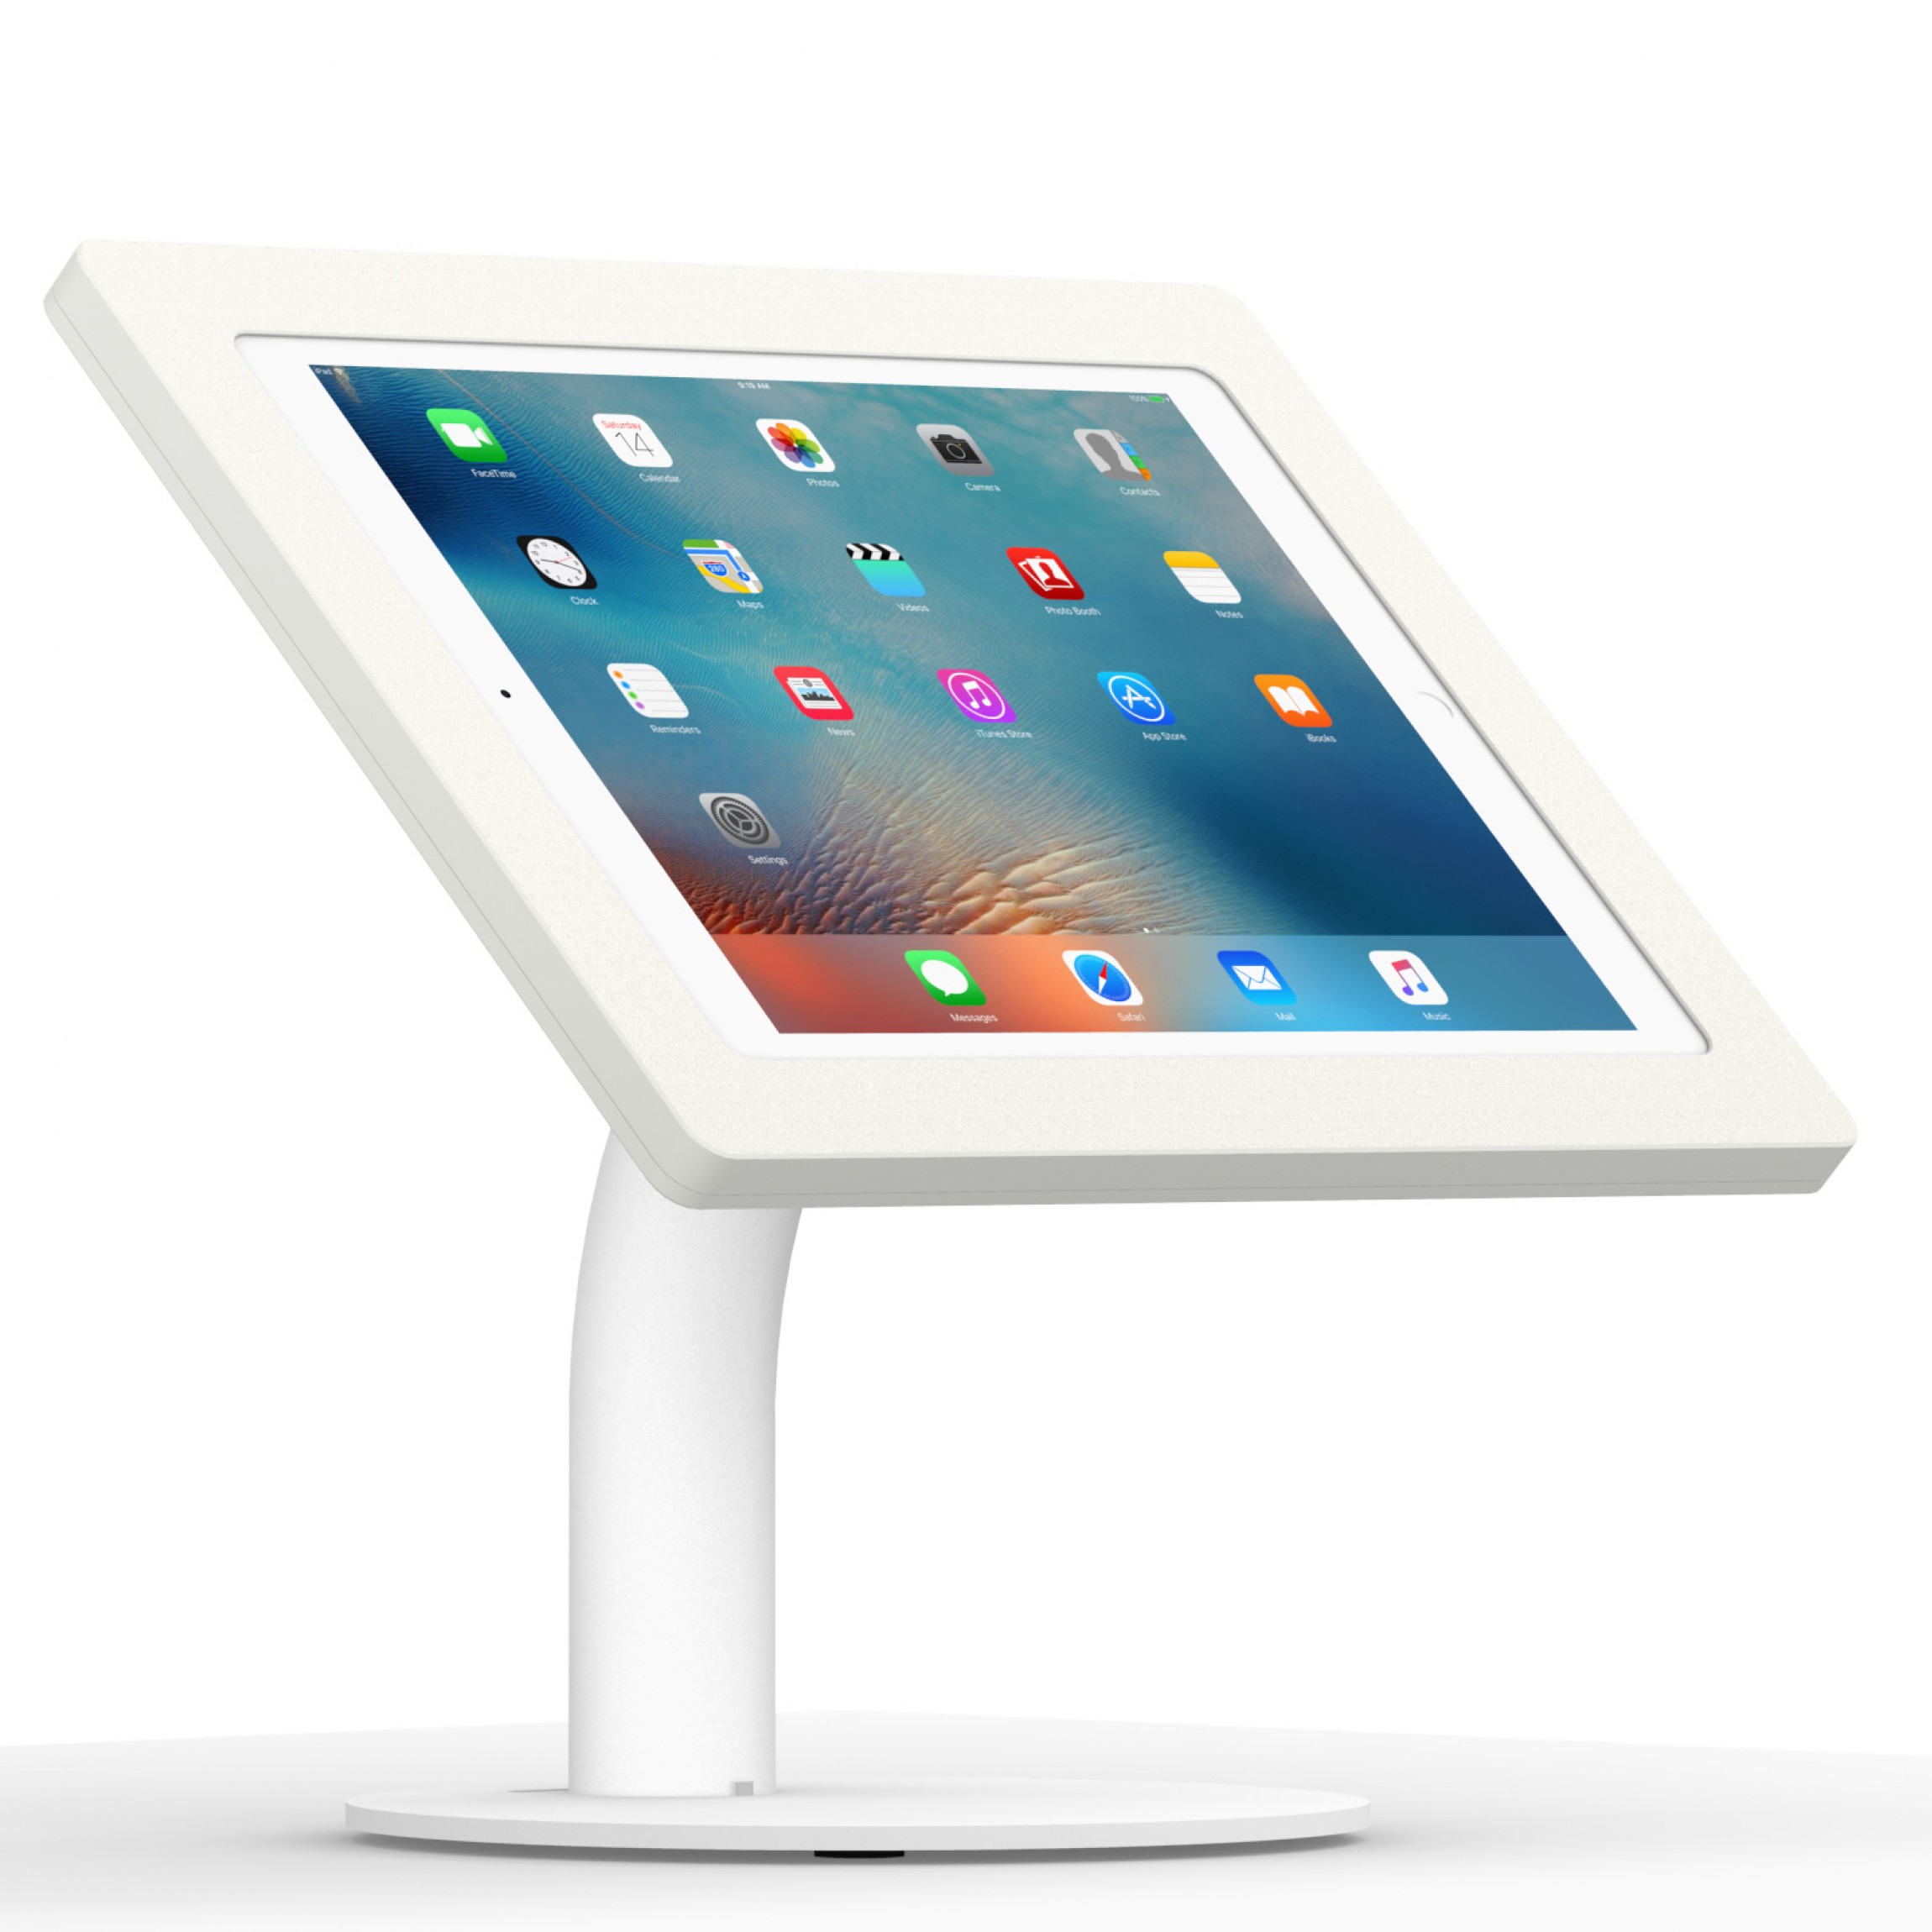 Stands - iPad Pro 12.9-inch (2nd generation) - Displays & Mounts - All  Accessories - Apple